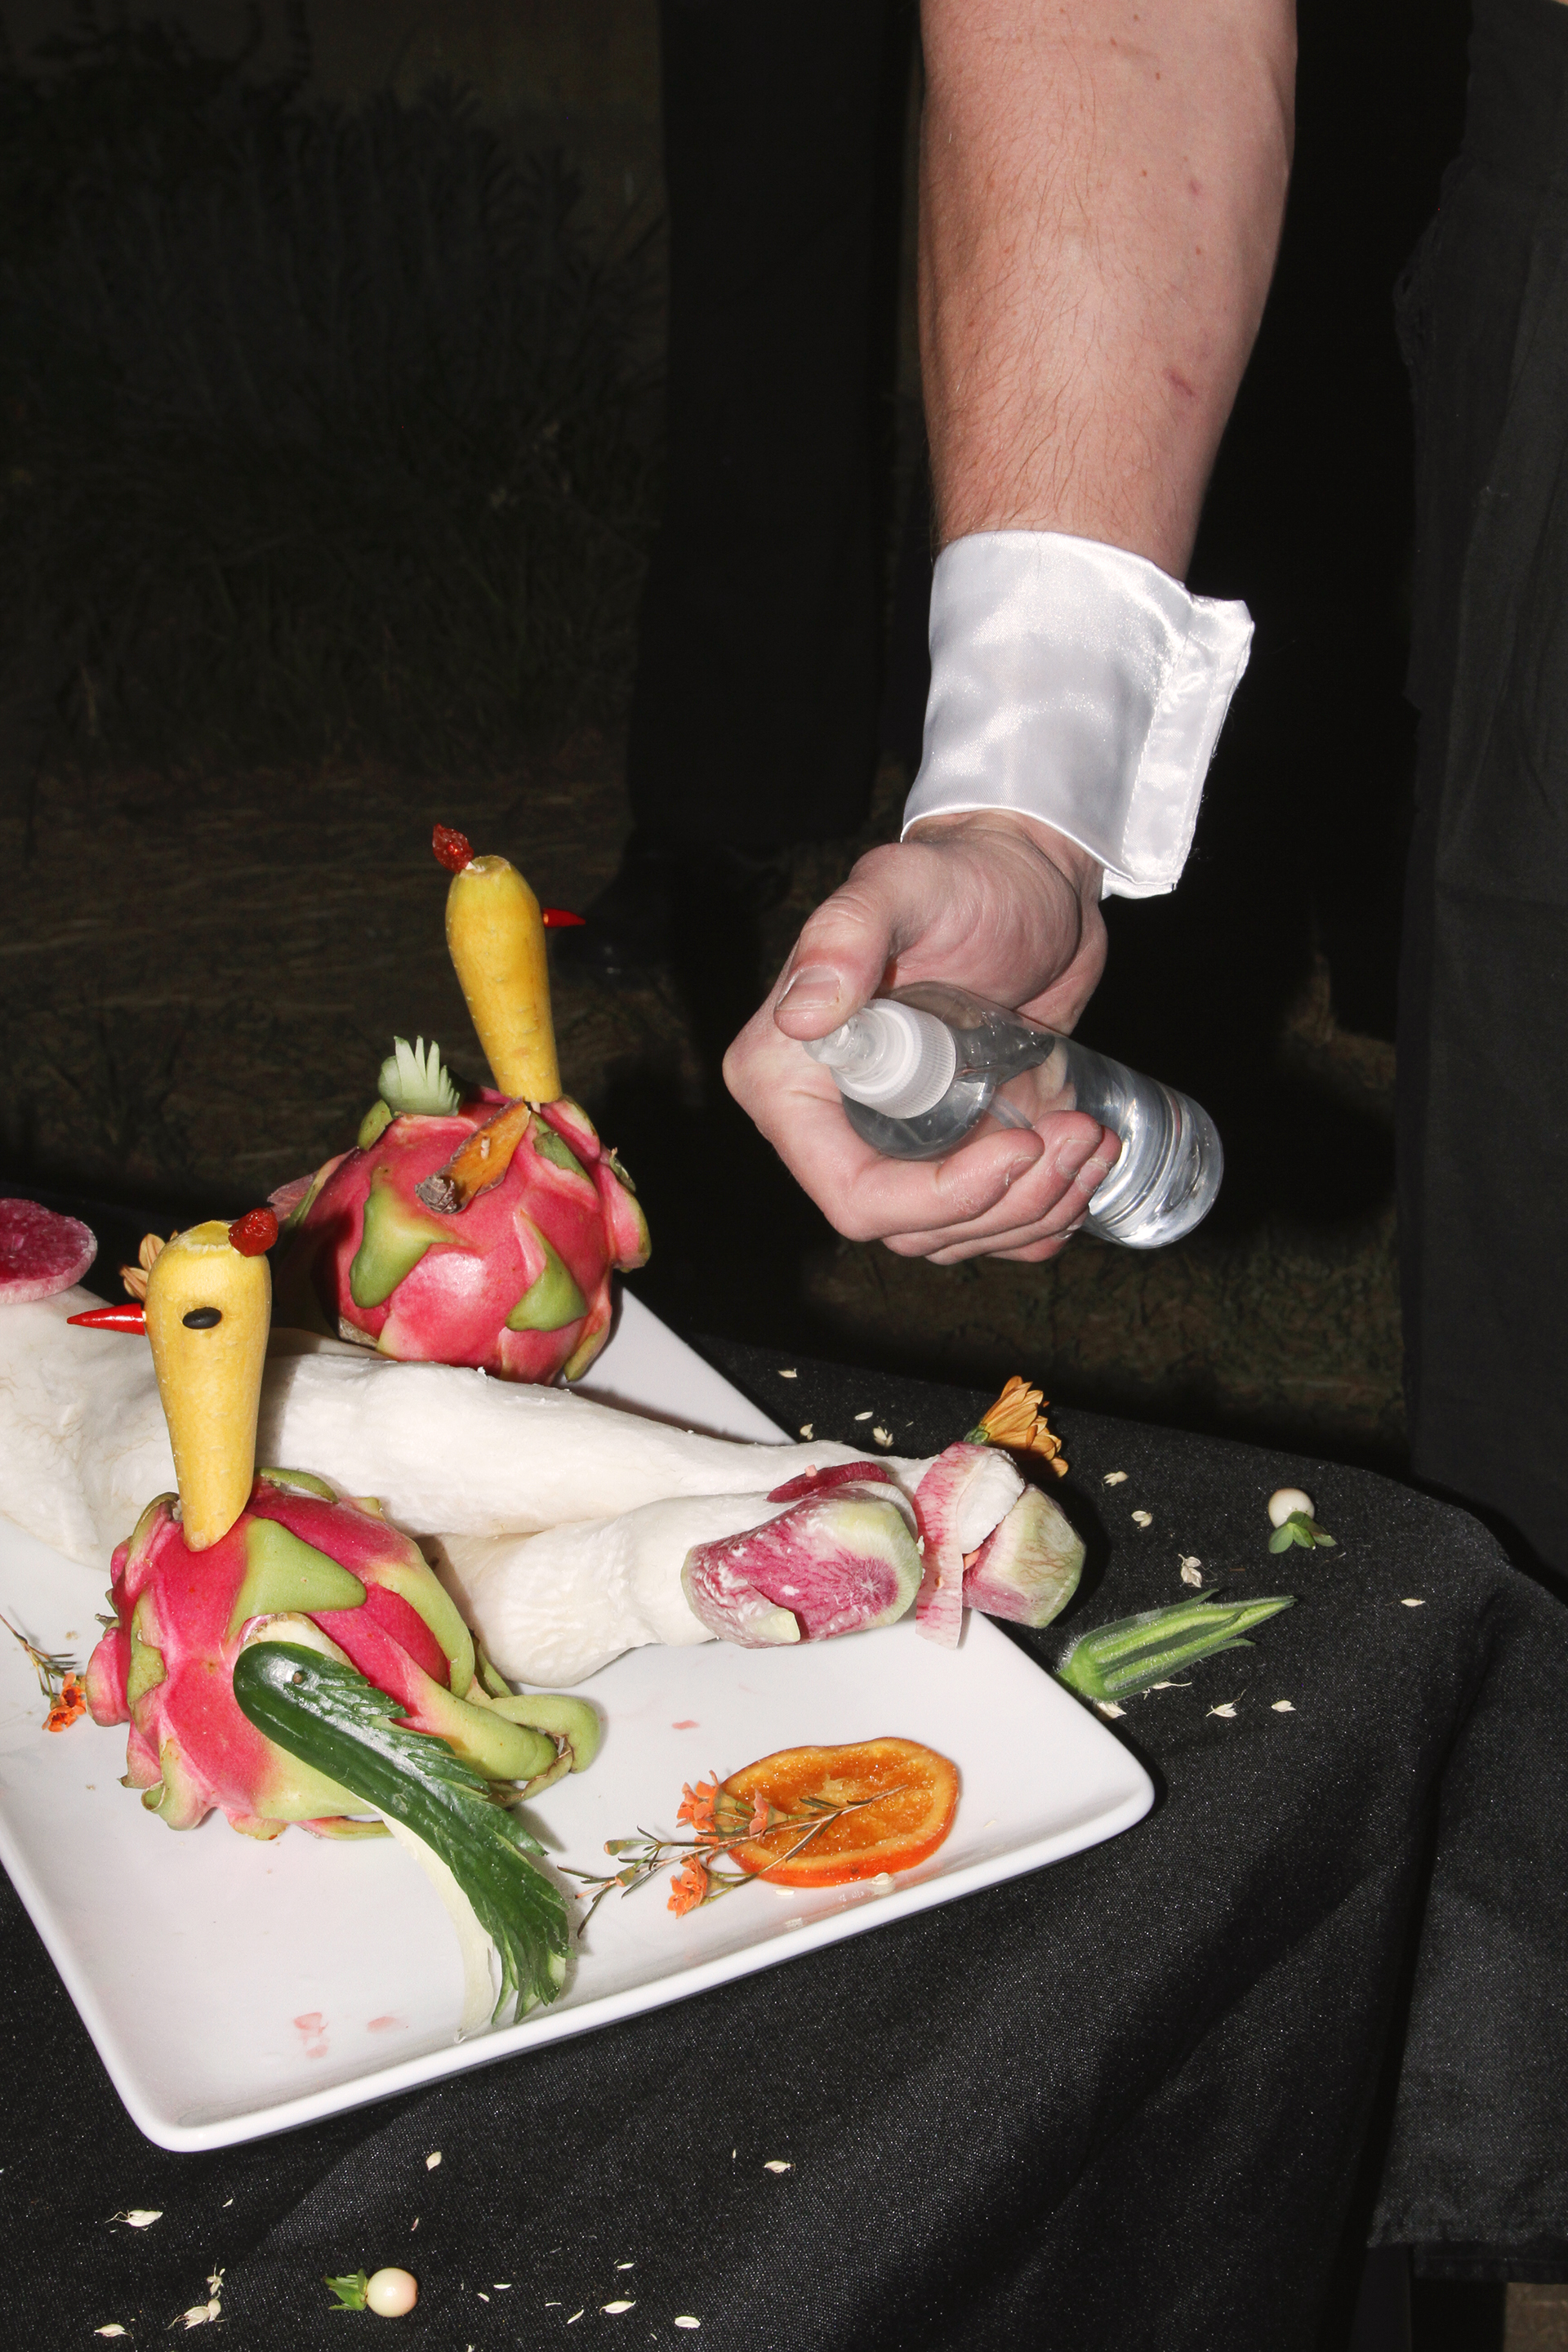 Detail of a shirtless white male butler spraying water on fruit sculptures on a black table